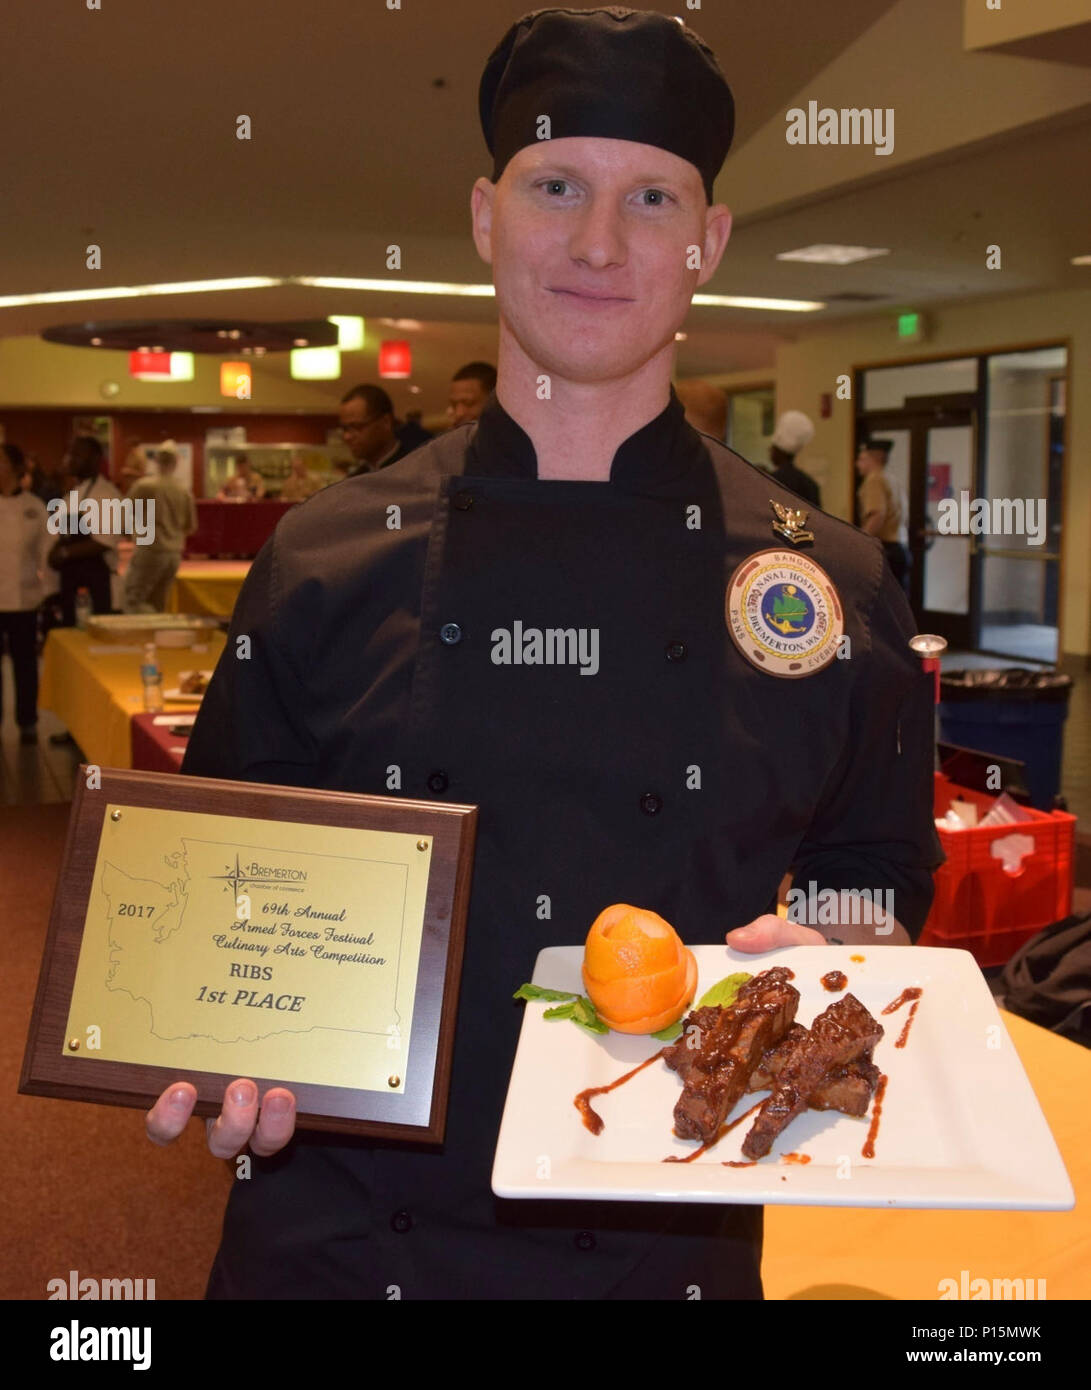 A handful of excellence...the 2017 69th Annual Armed Force Festival’s Culinary Arts Competition winner in the highly-contested 'Ribs' category was awarded to Culinary Specialist 2nd Class Christopher Wojcik of Naval Hospital Bremerton (Official Navy Stock Photo